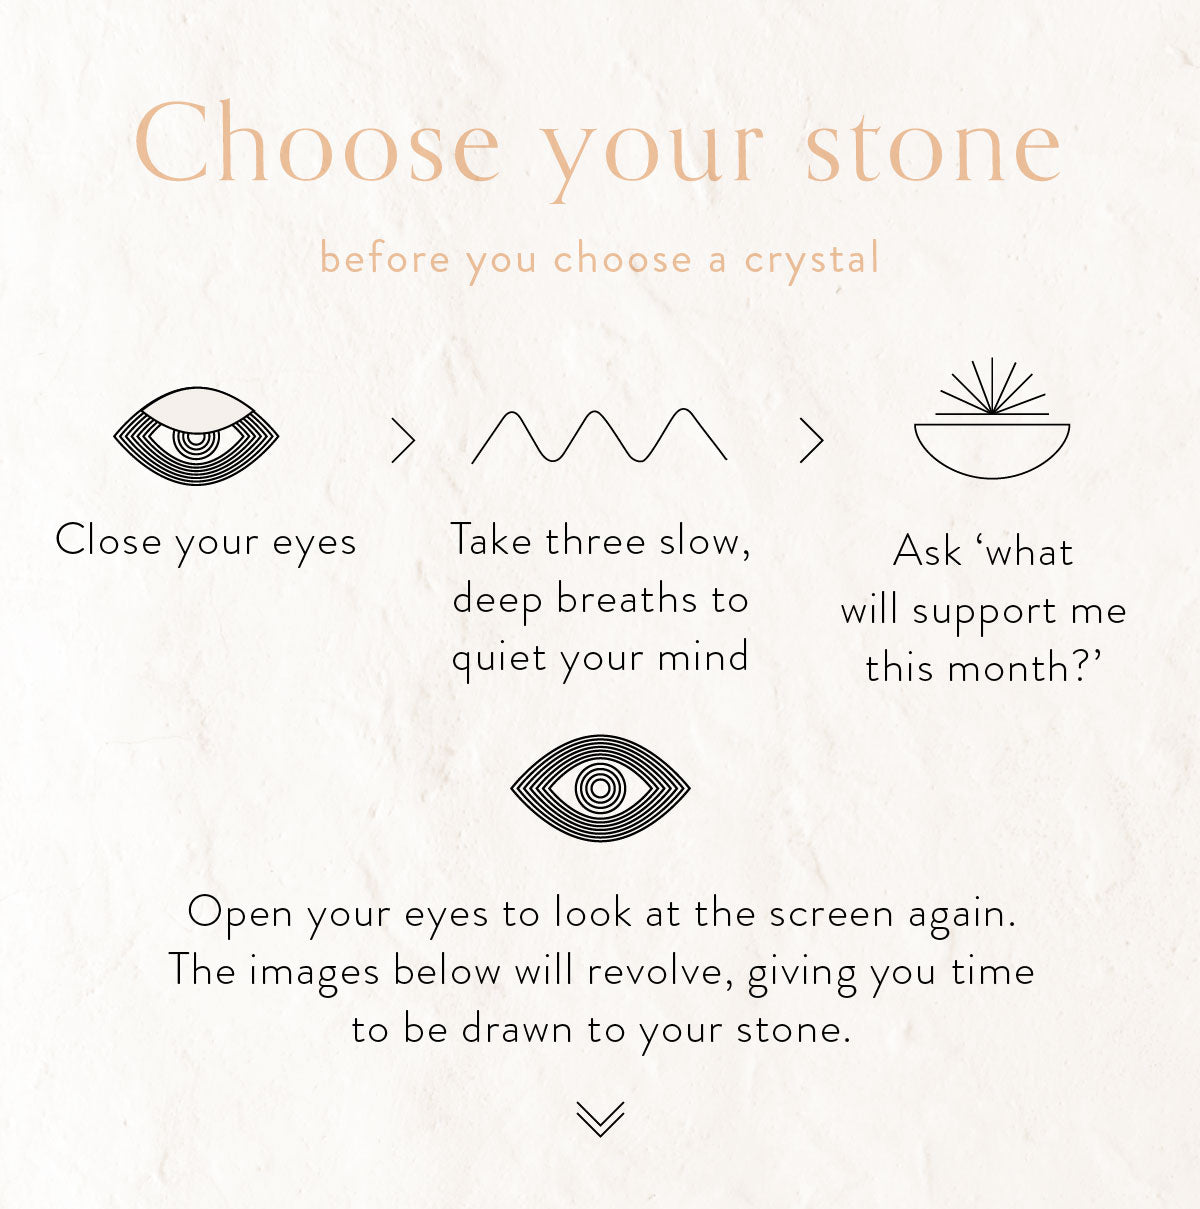 Choose your stone